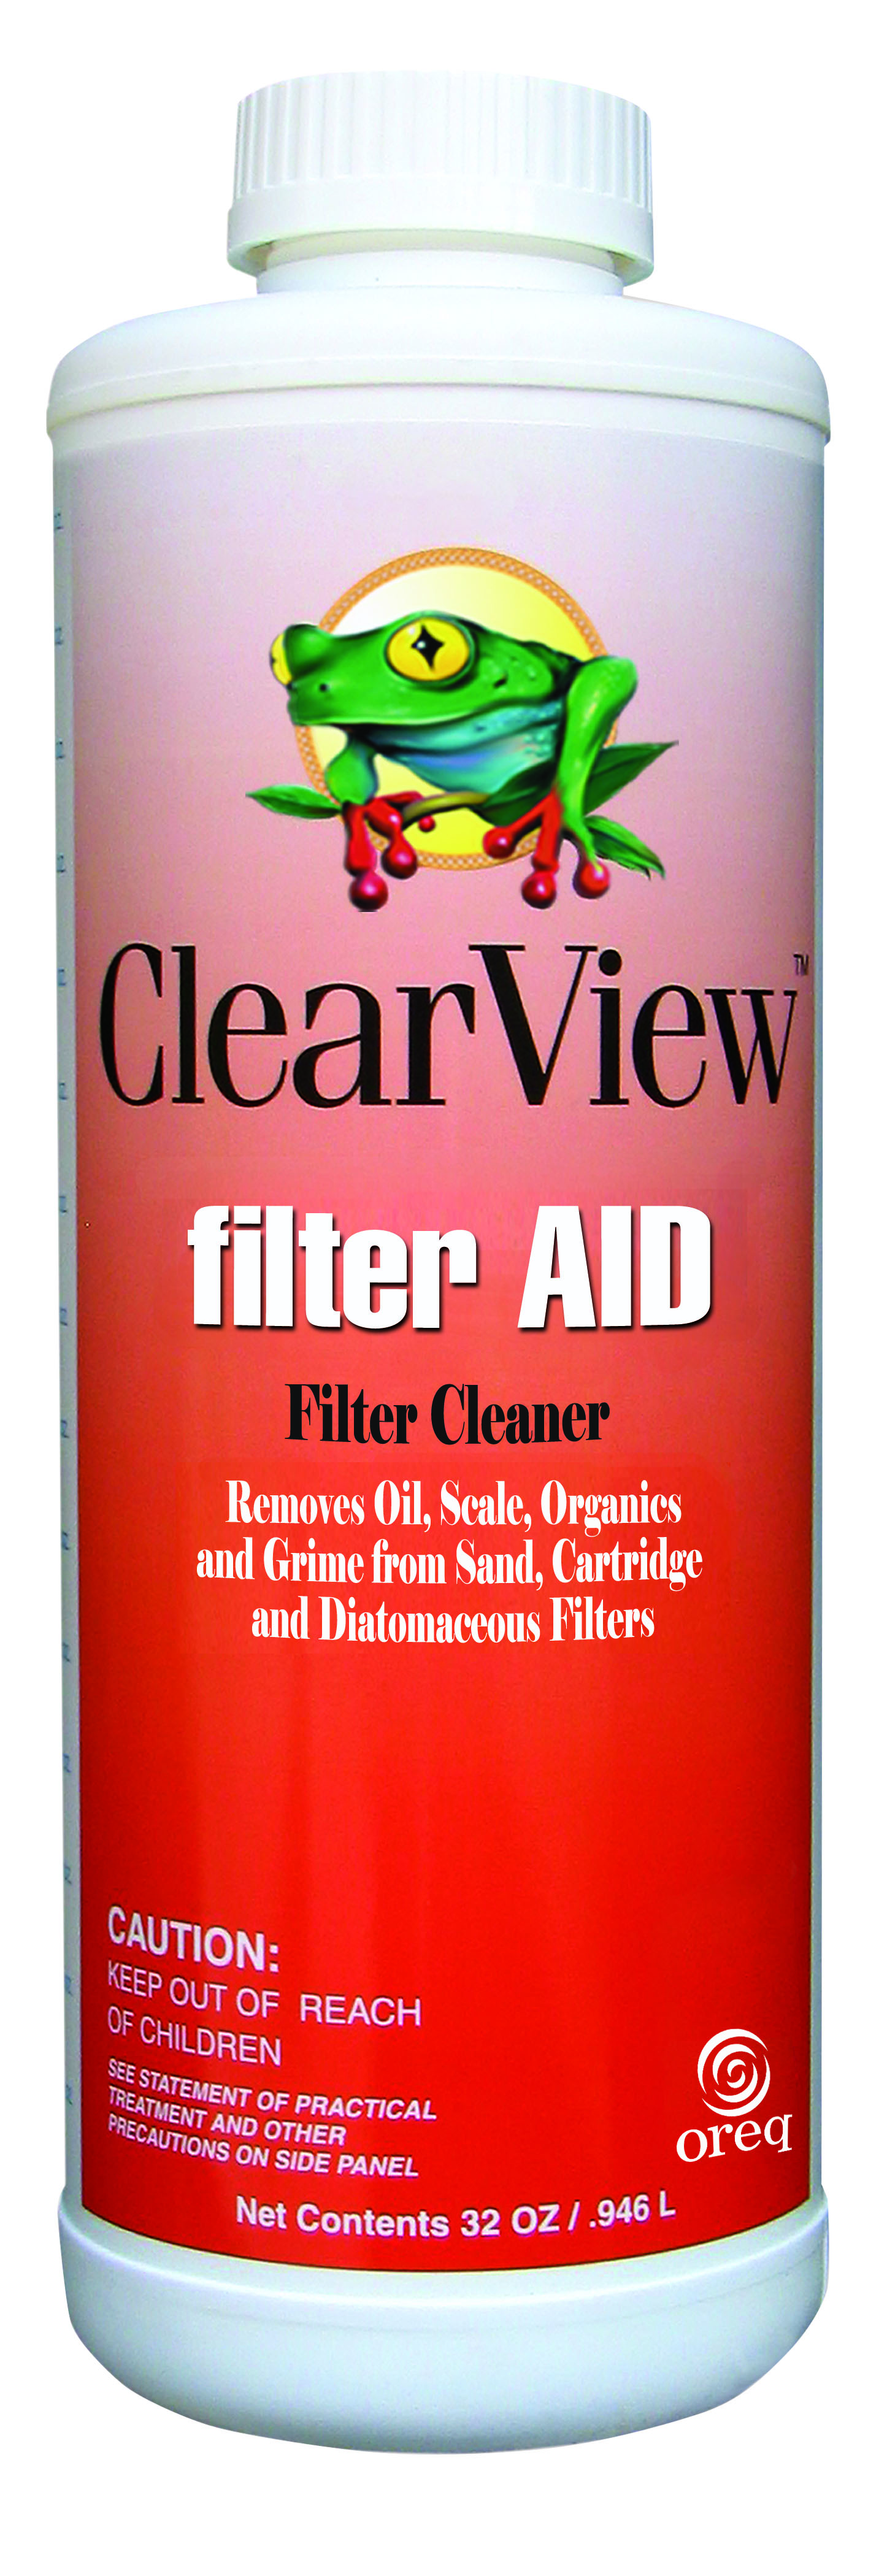 Clearview Filter Aid 12 X1 qt/cs - CLEARVIEW